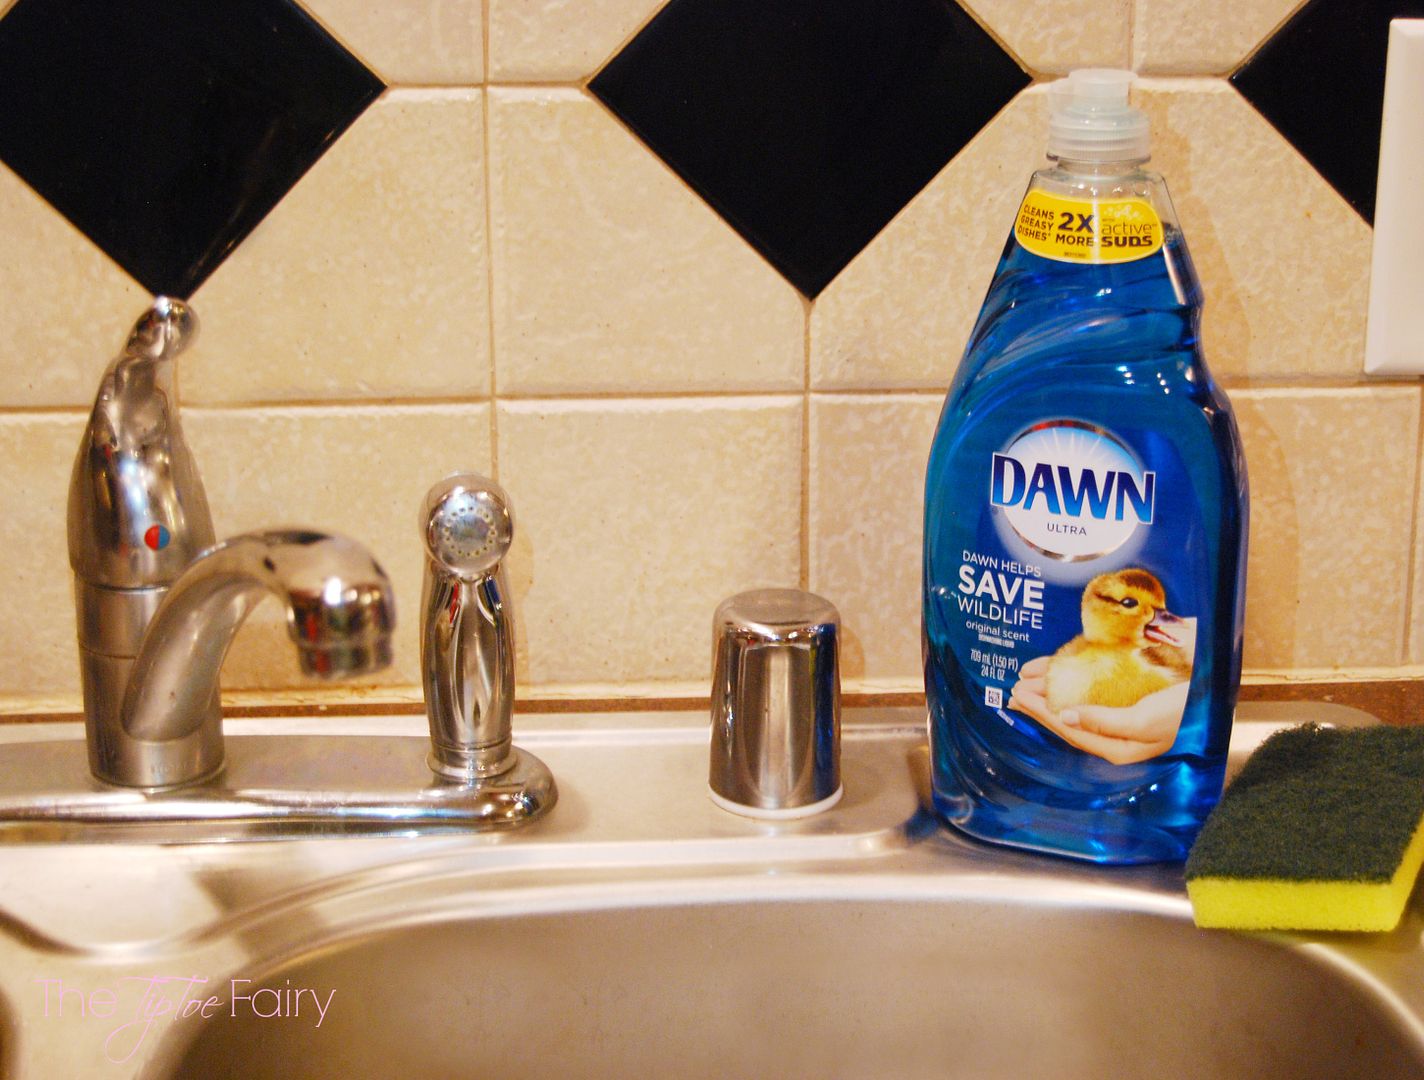 There's more to Dawn than just dirty dishes!  Check out these kitchen tips! #DawnBeyondtheSink